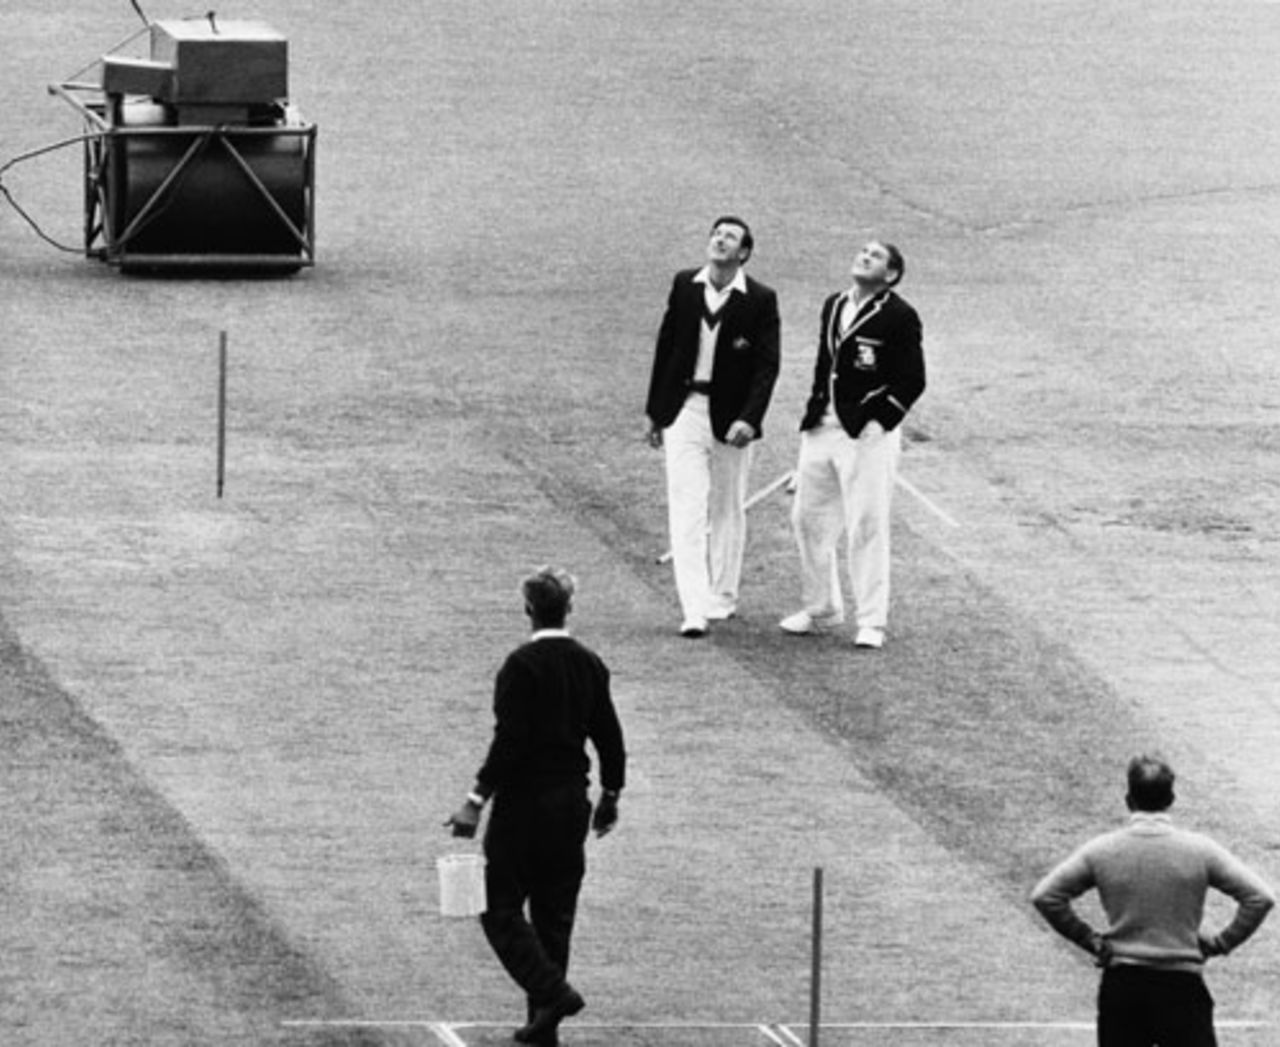 Bill Lawry and Ray Illingworth toss the coin, Australia v England, 5th Test, 1st day, Melbourne, January 21, 1971